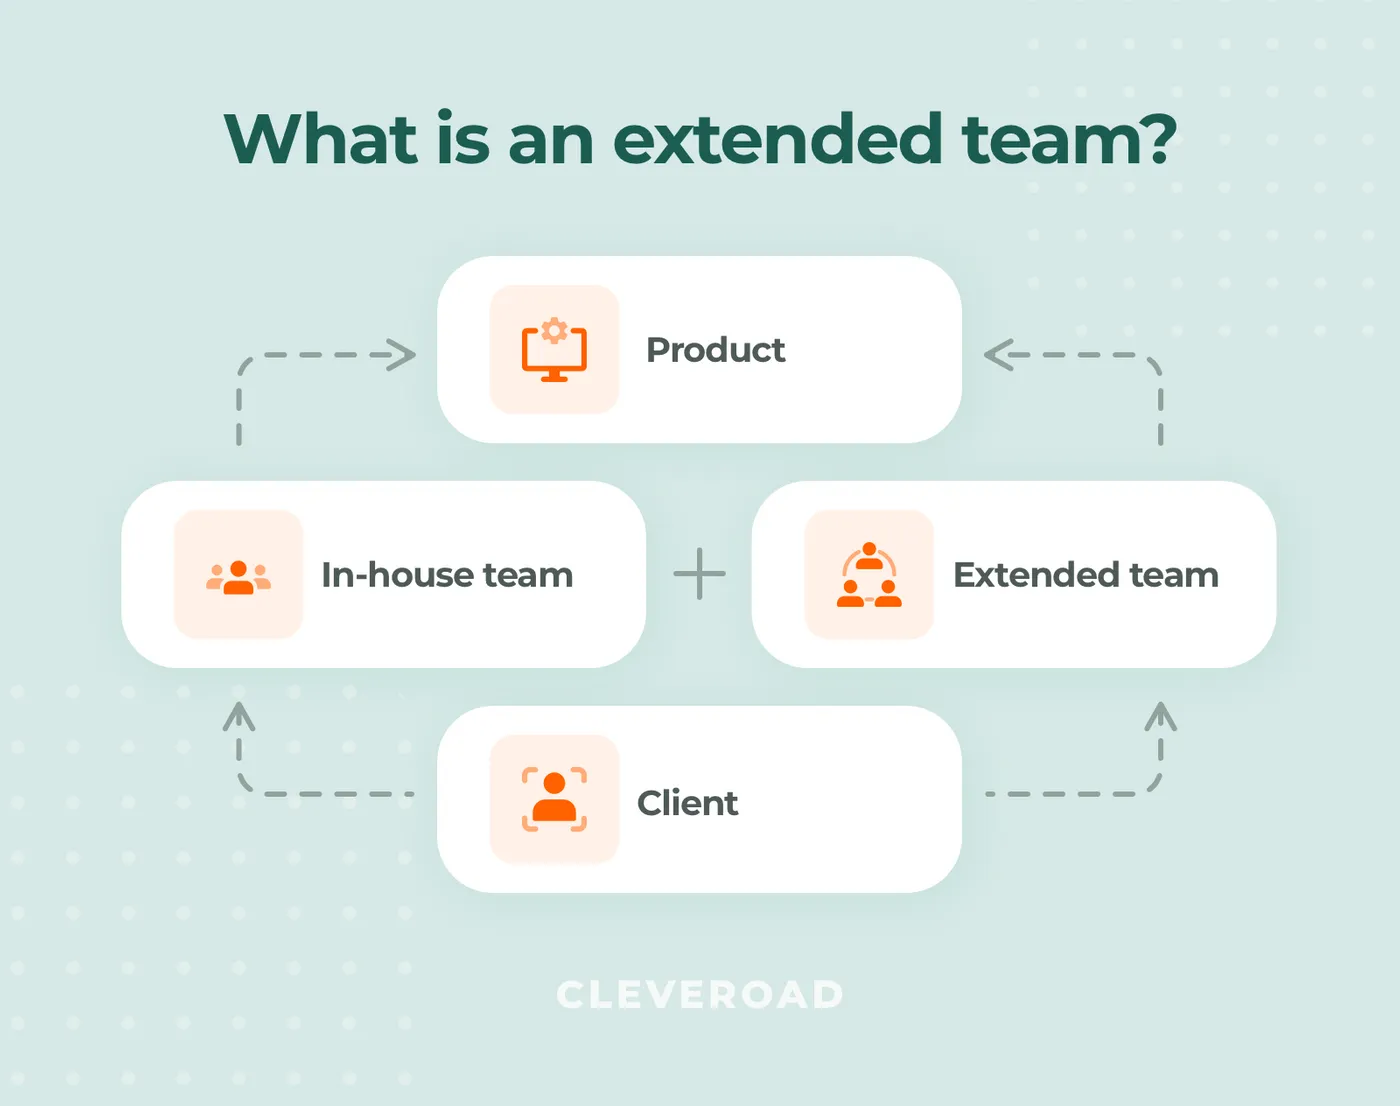 The concept of the extended team